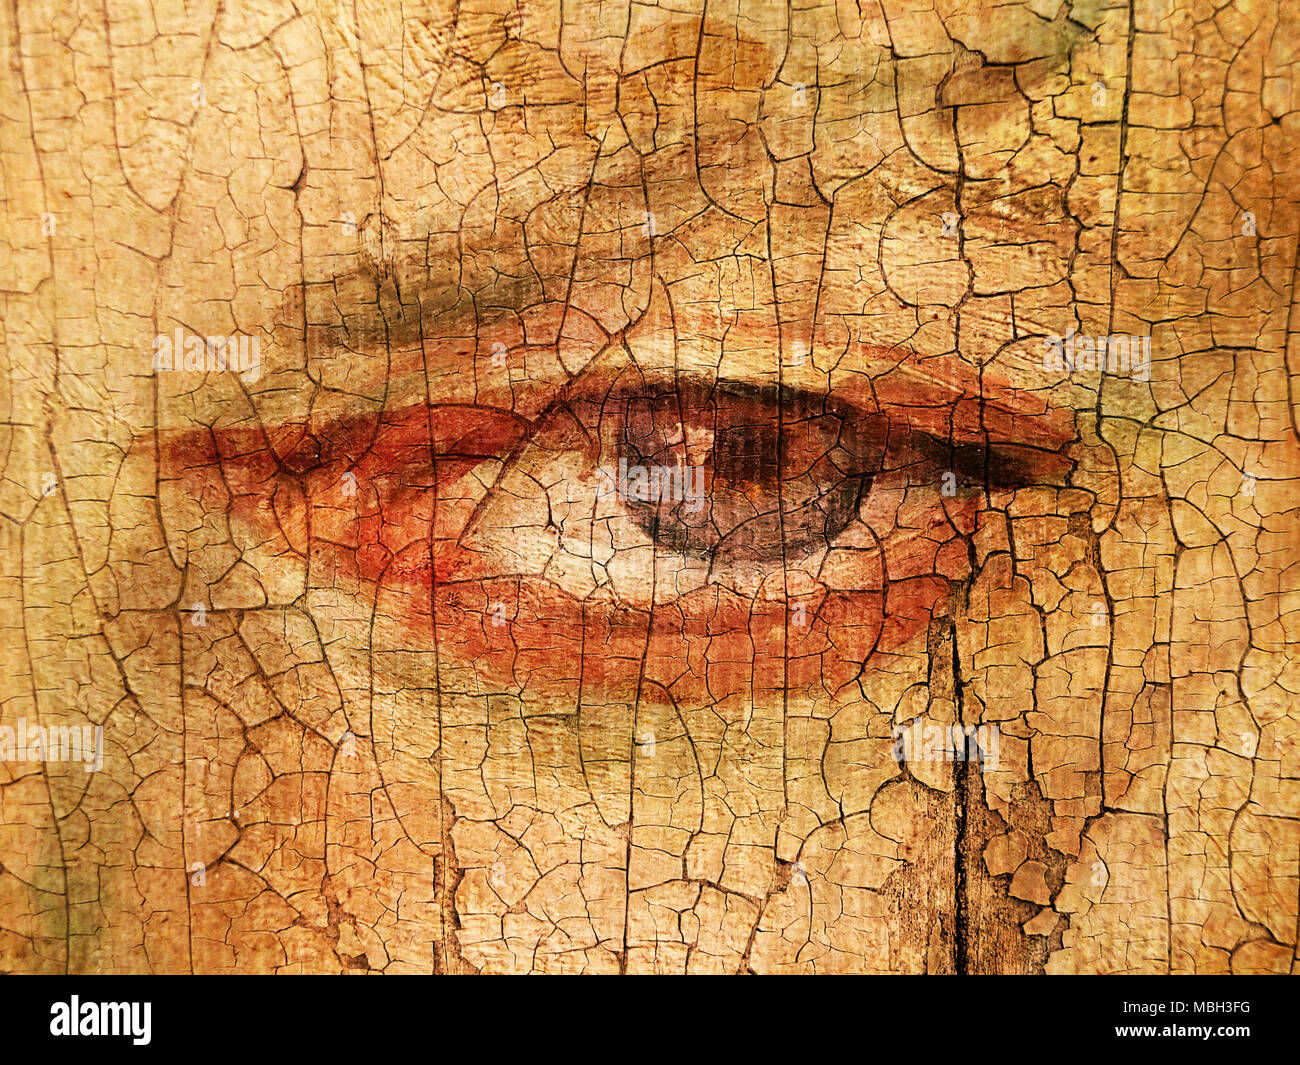 Textured and Painted Eye on Cracked wall Stock Photo